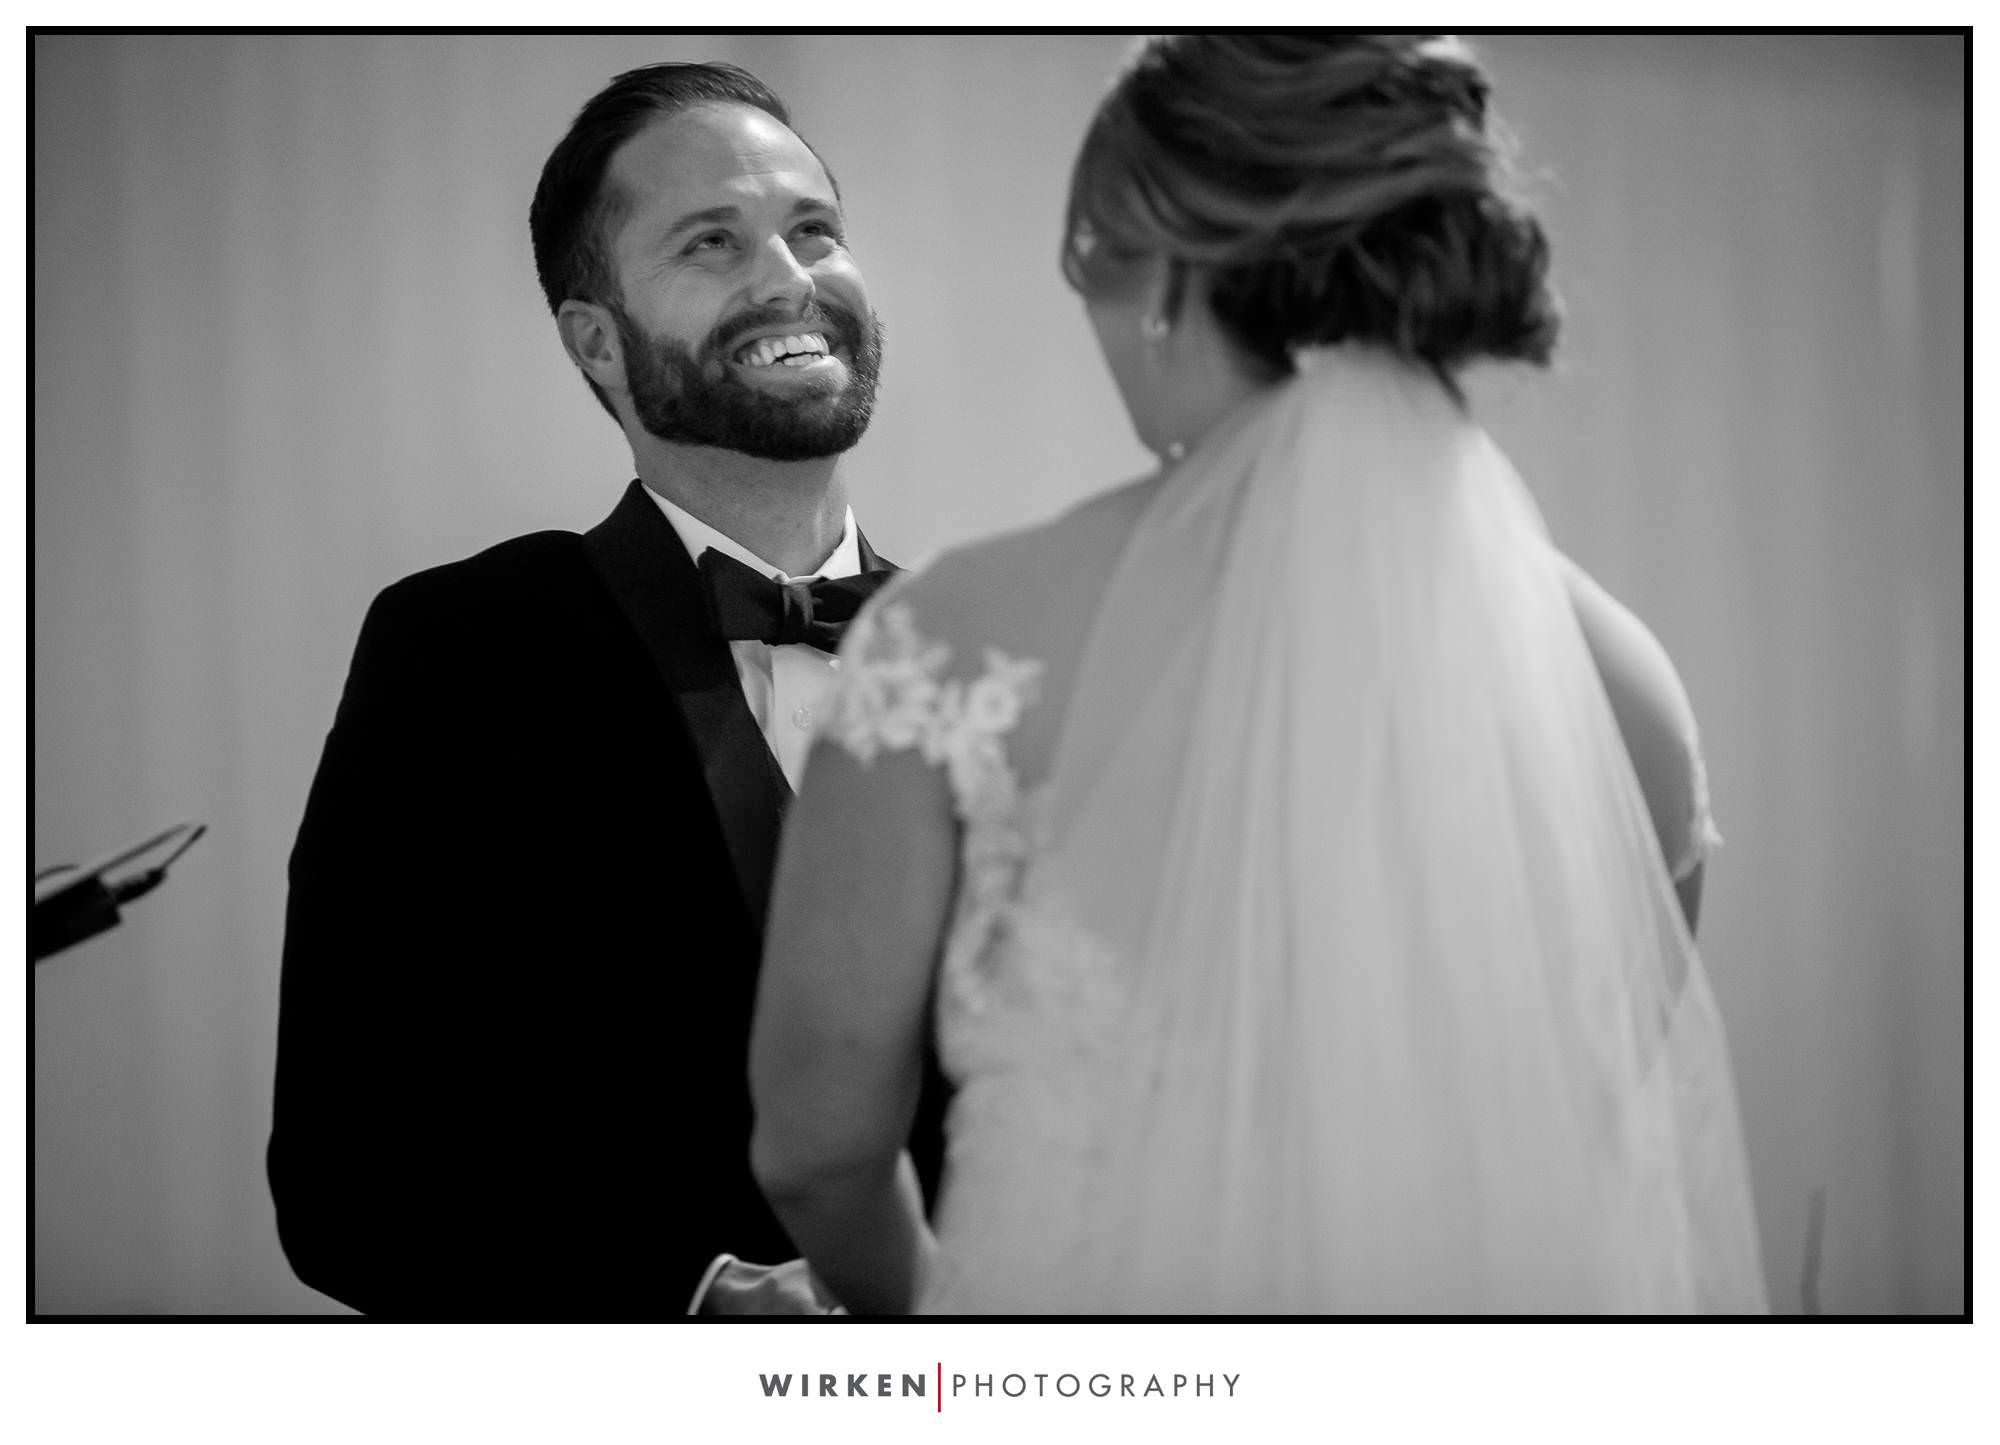 Ryan laughs during their wedding ceremony at the Gallery Event Center